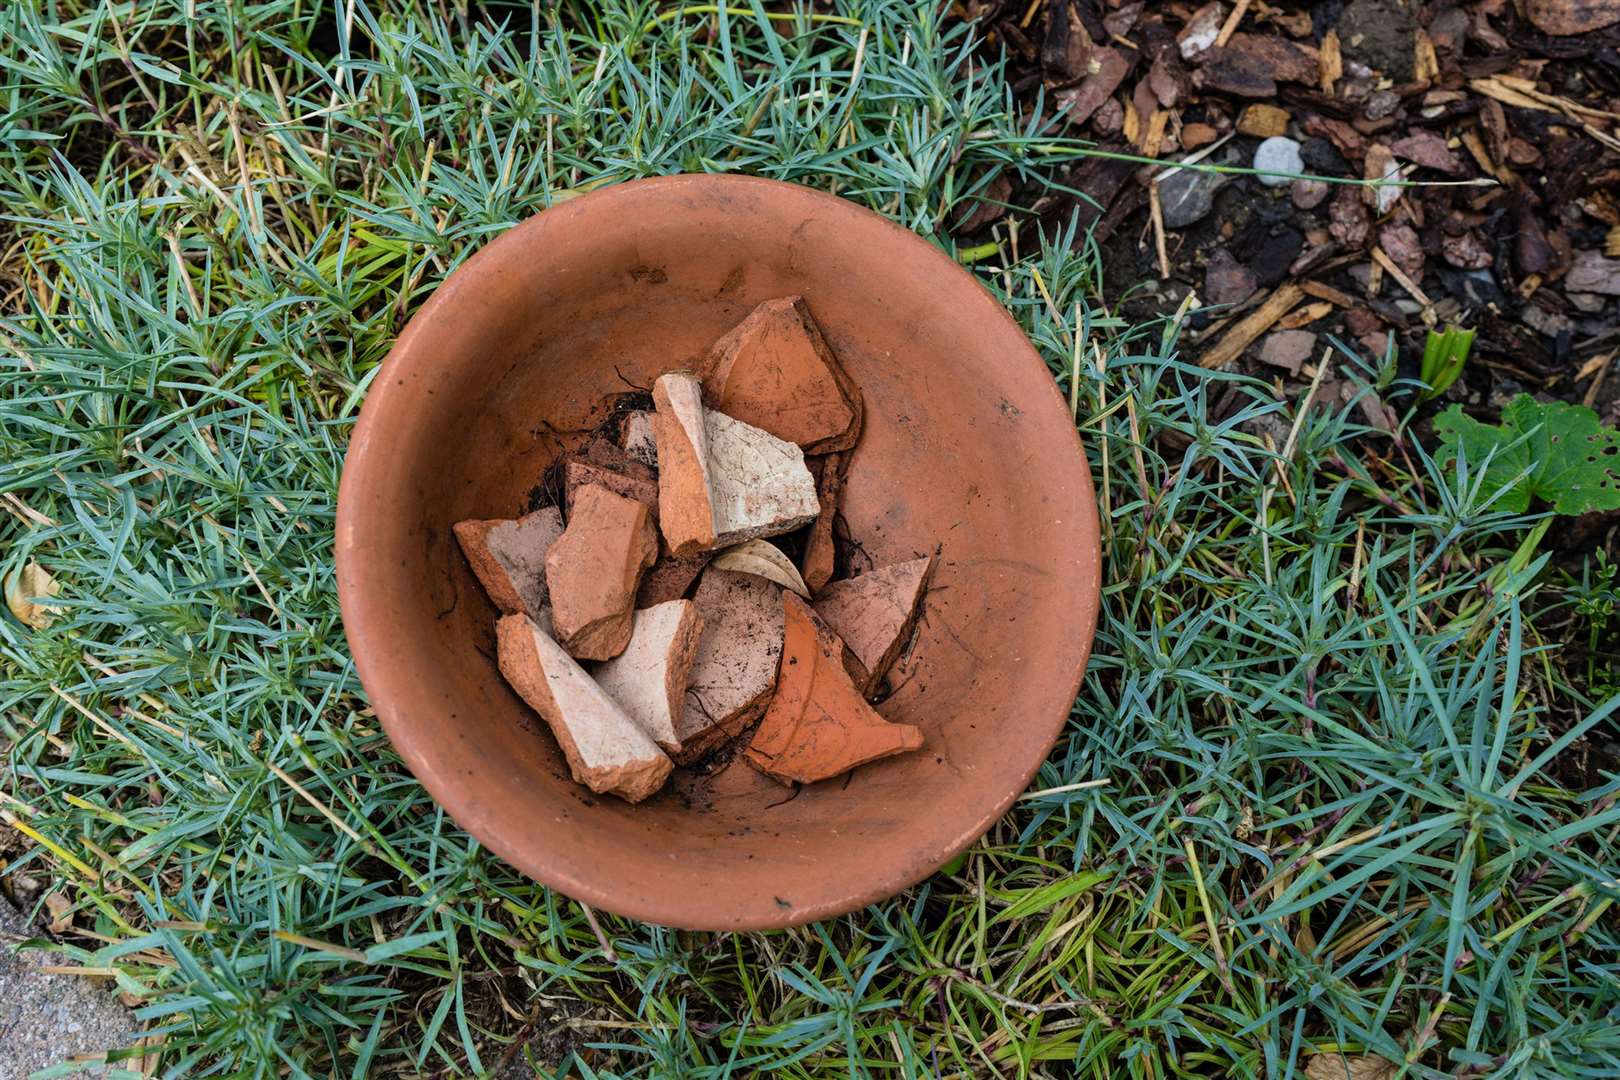 Broken ceramic pots can be reused to improve drainage.